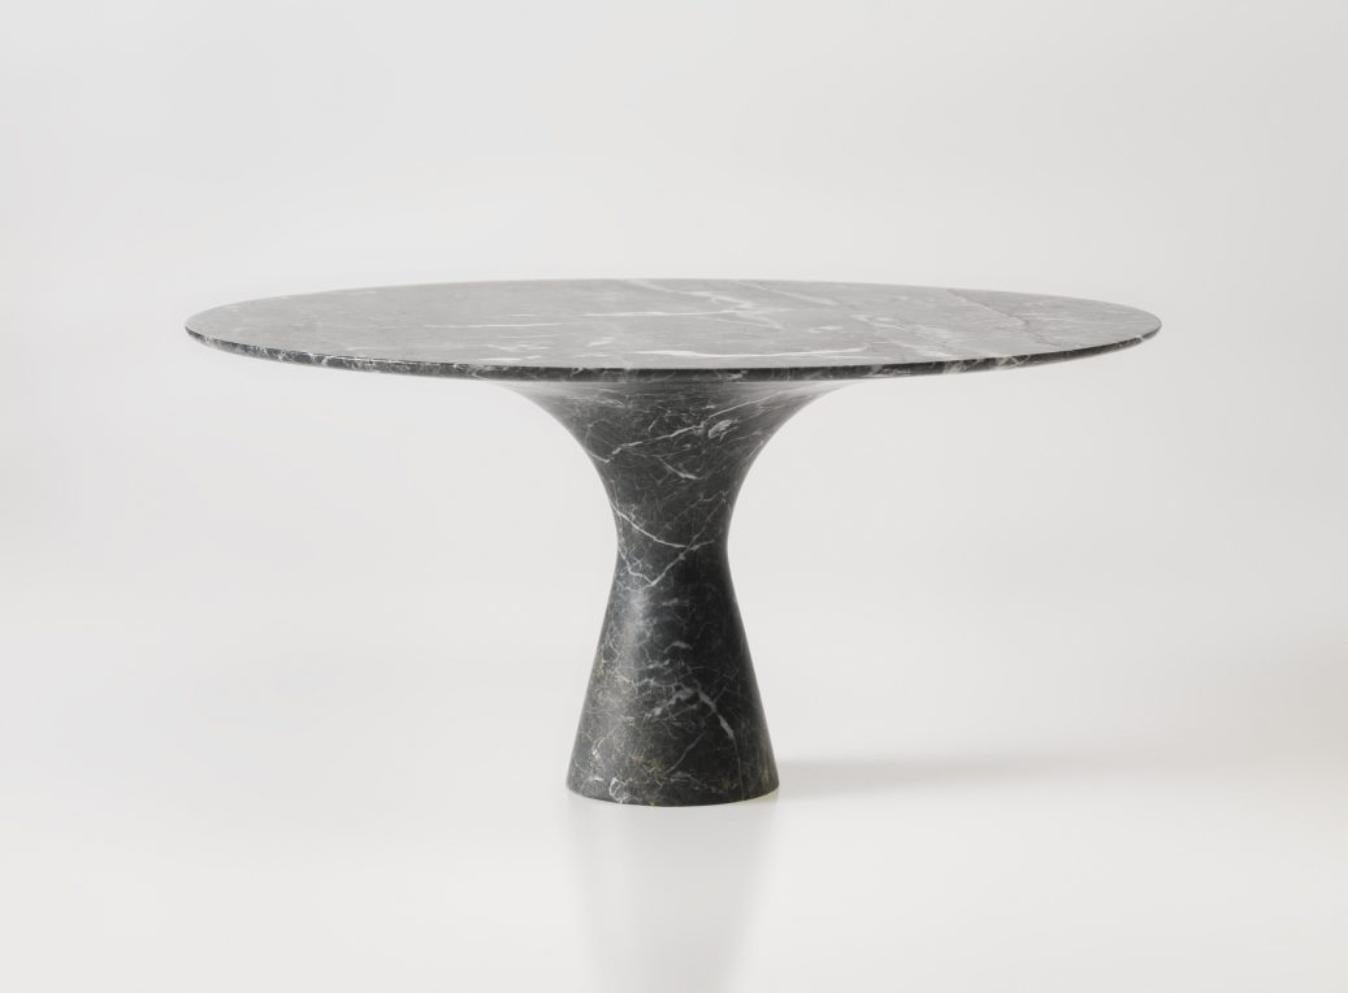 Kynos Refined Contemporary Marmor Low Round Table (Italienisch) im Angebot